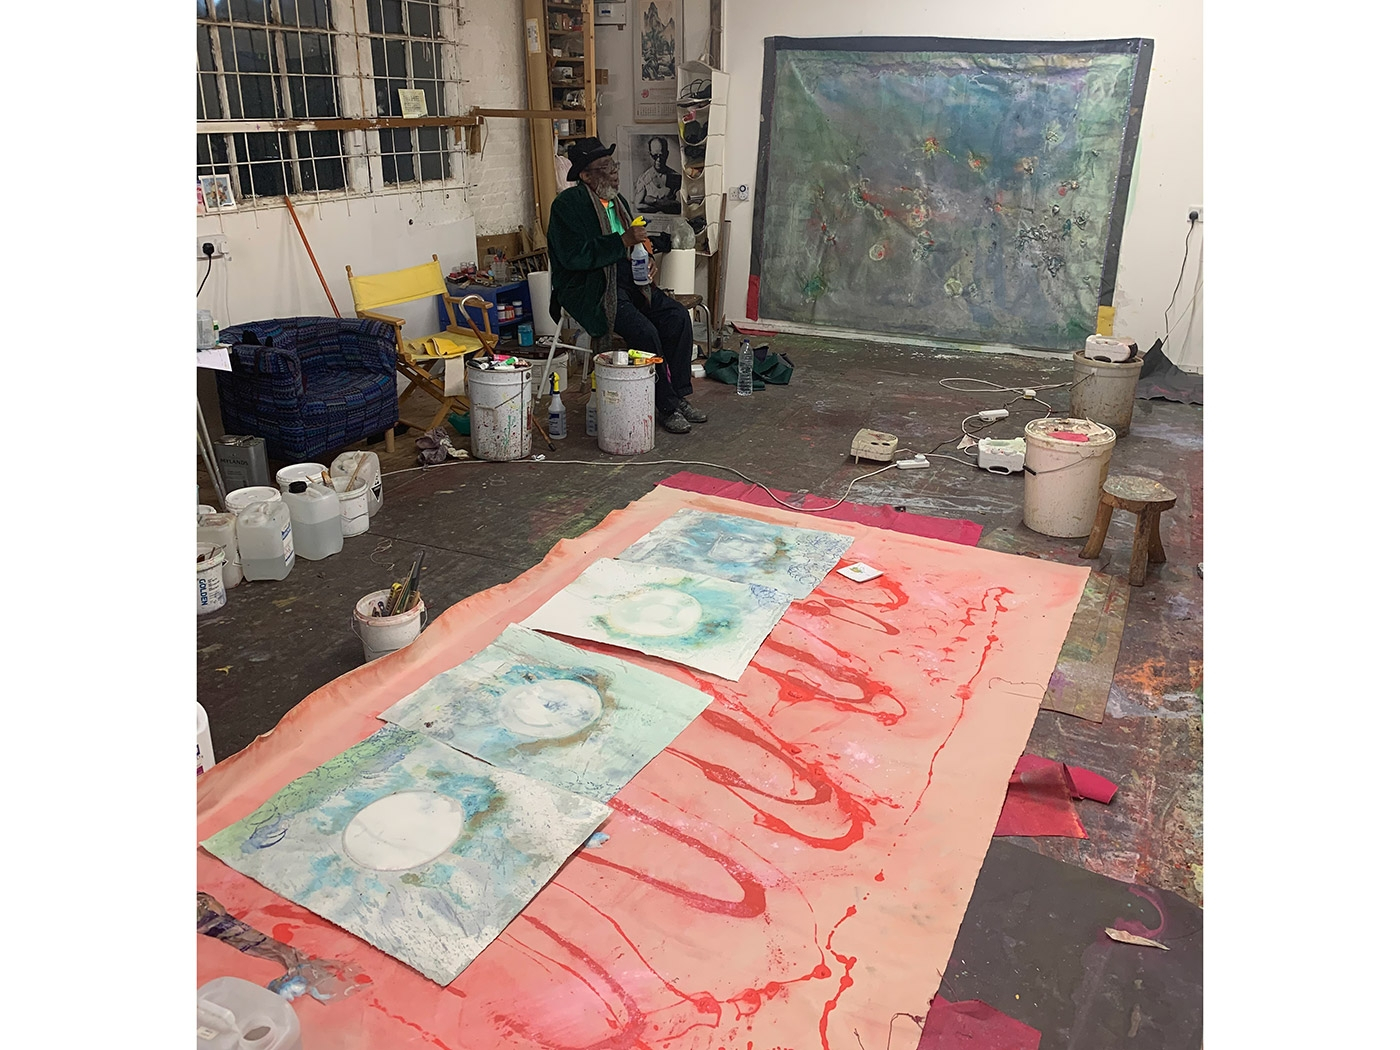 Artist Frank Bowling in his London studio selecting source artwork for the project (2019)